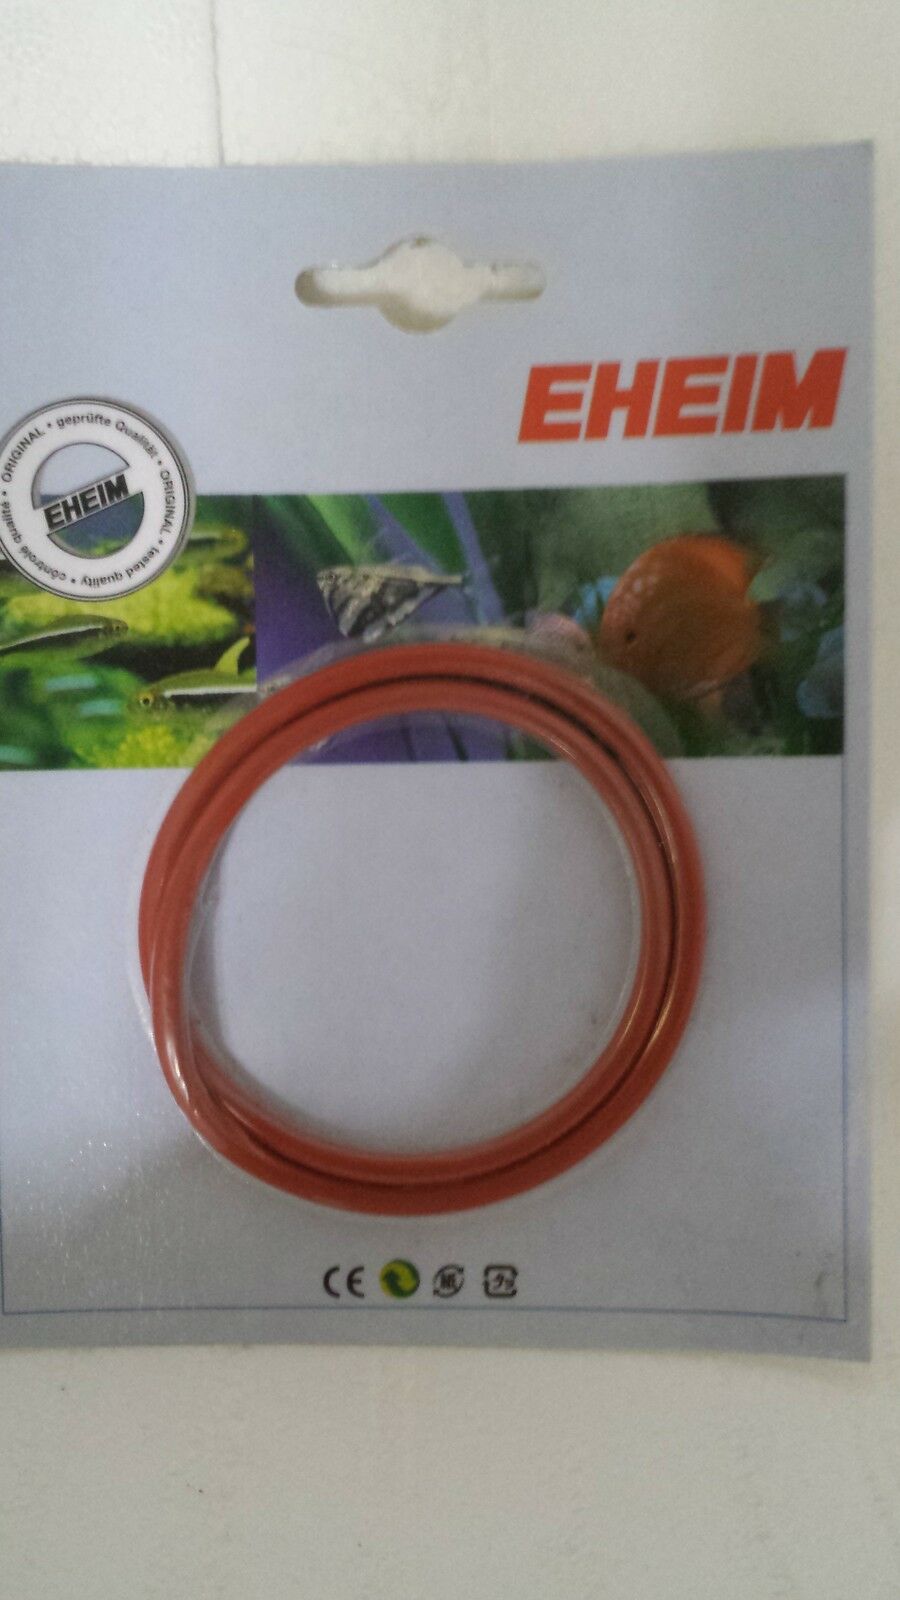 Eheim O Ring part 7314058 to suit Ecco filters 2032, 2034 and 2036